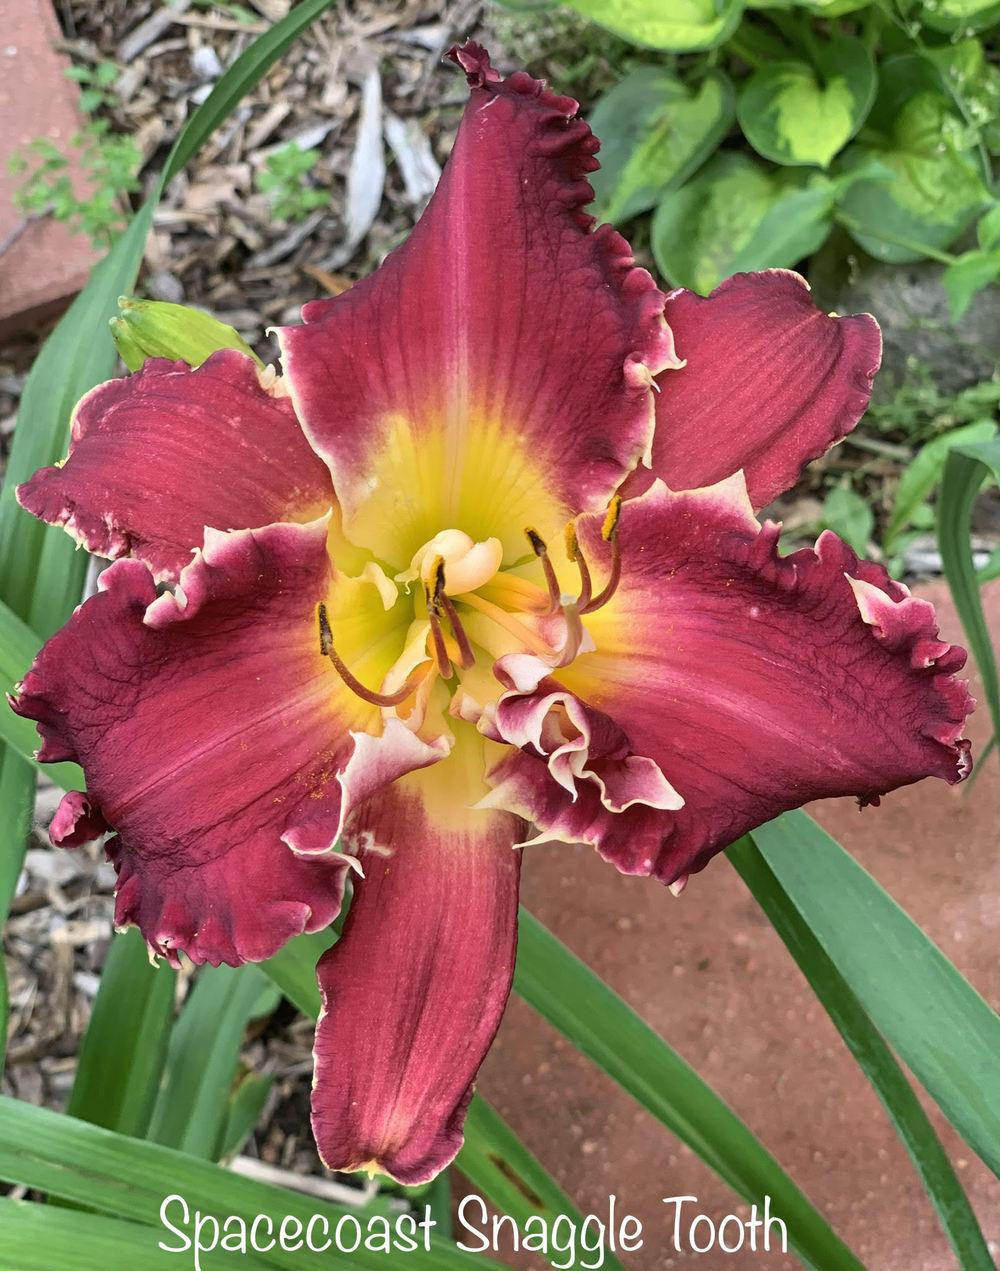 Photo of Daylily (Hemerocallis 'Spacecoast Snaggle Tooth') uploaded by tinahartman64